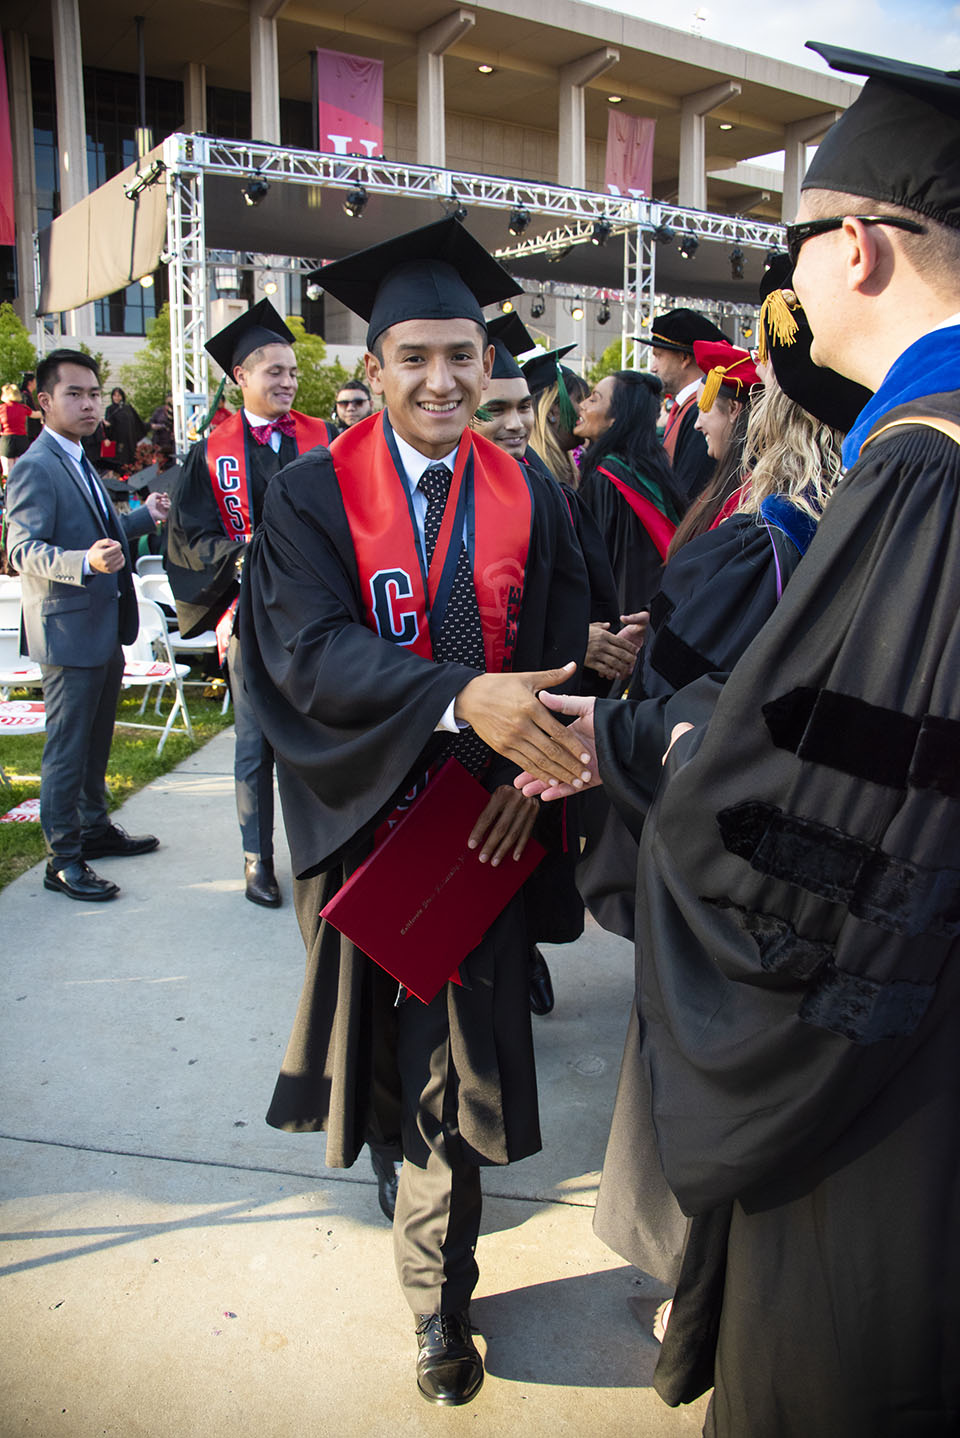 A line of CSUN graduates shakes hands with another line of CSUN graduates.